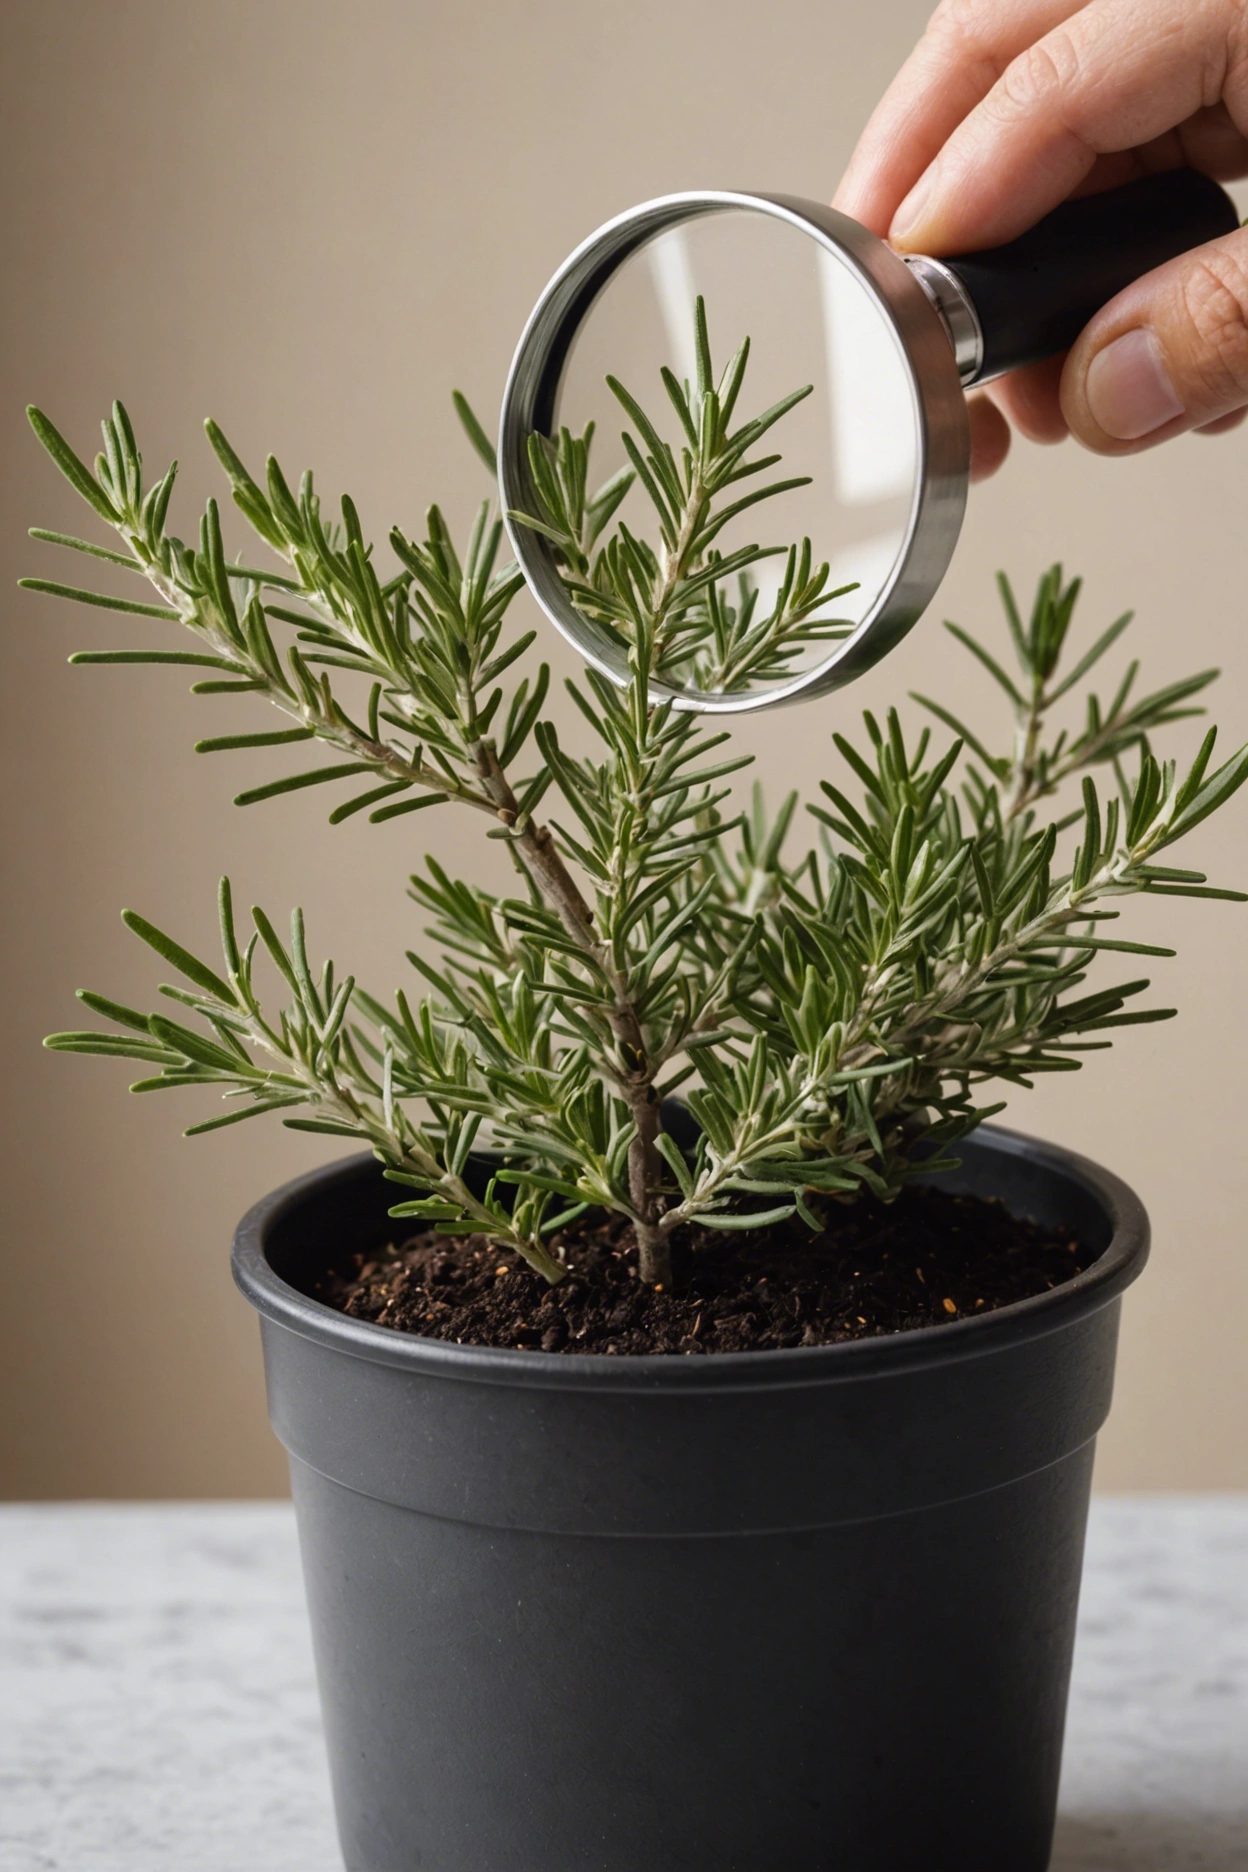 "Close-up of a yellowing rosemary plant in a pot, with a magnifying glass, pH test kit, and organic fertilizer nearby."